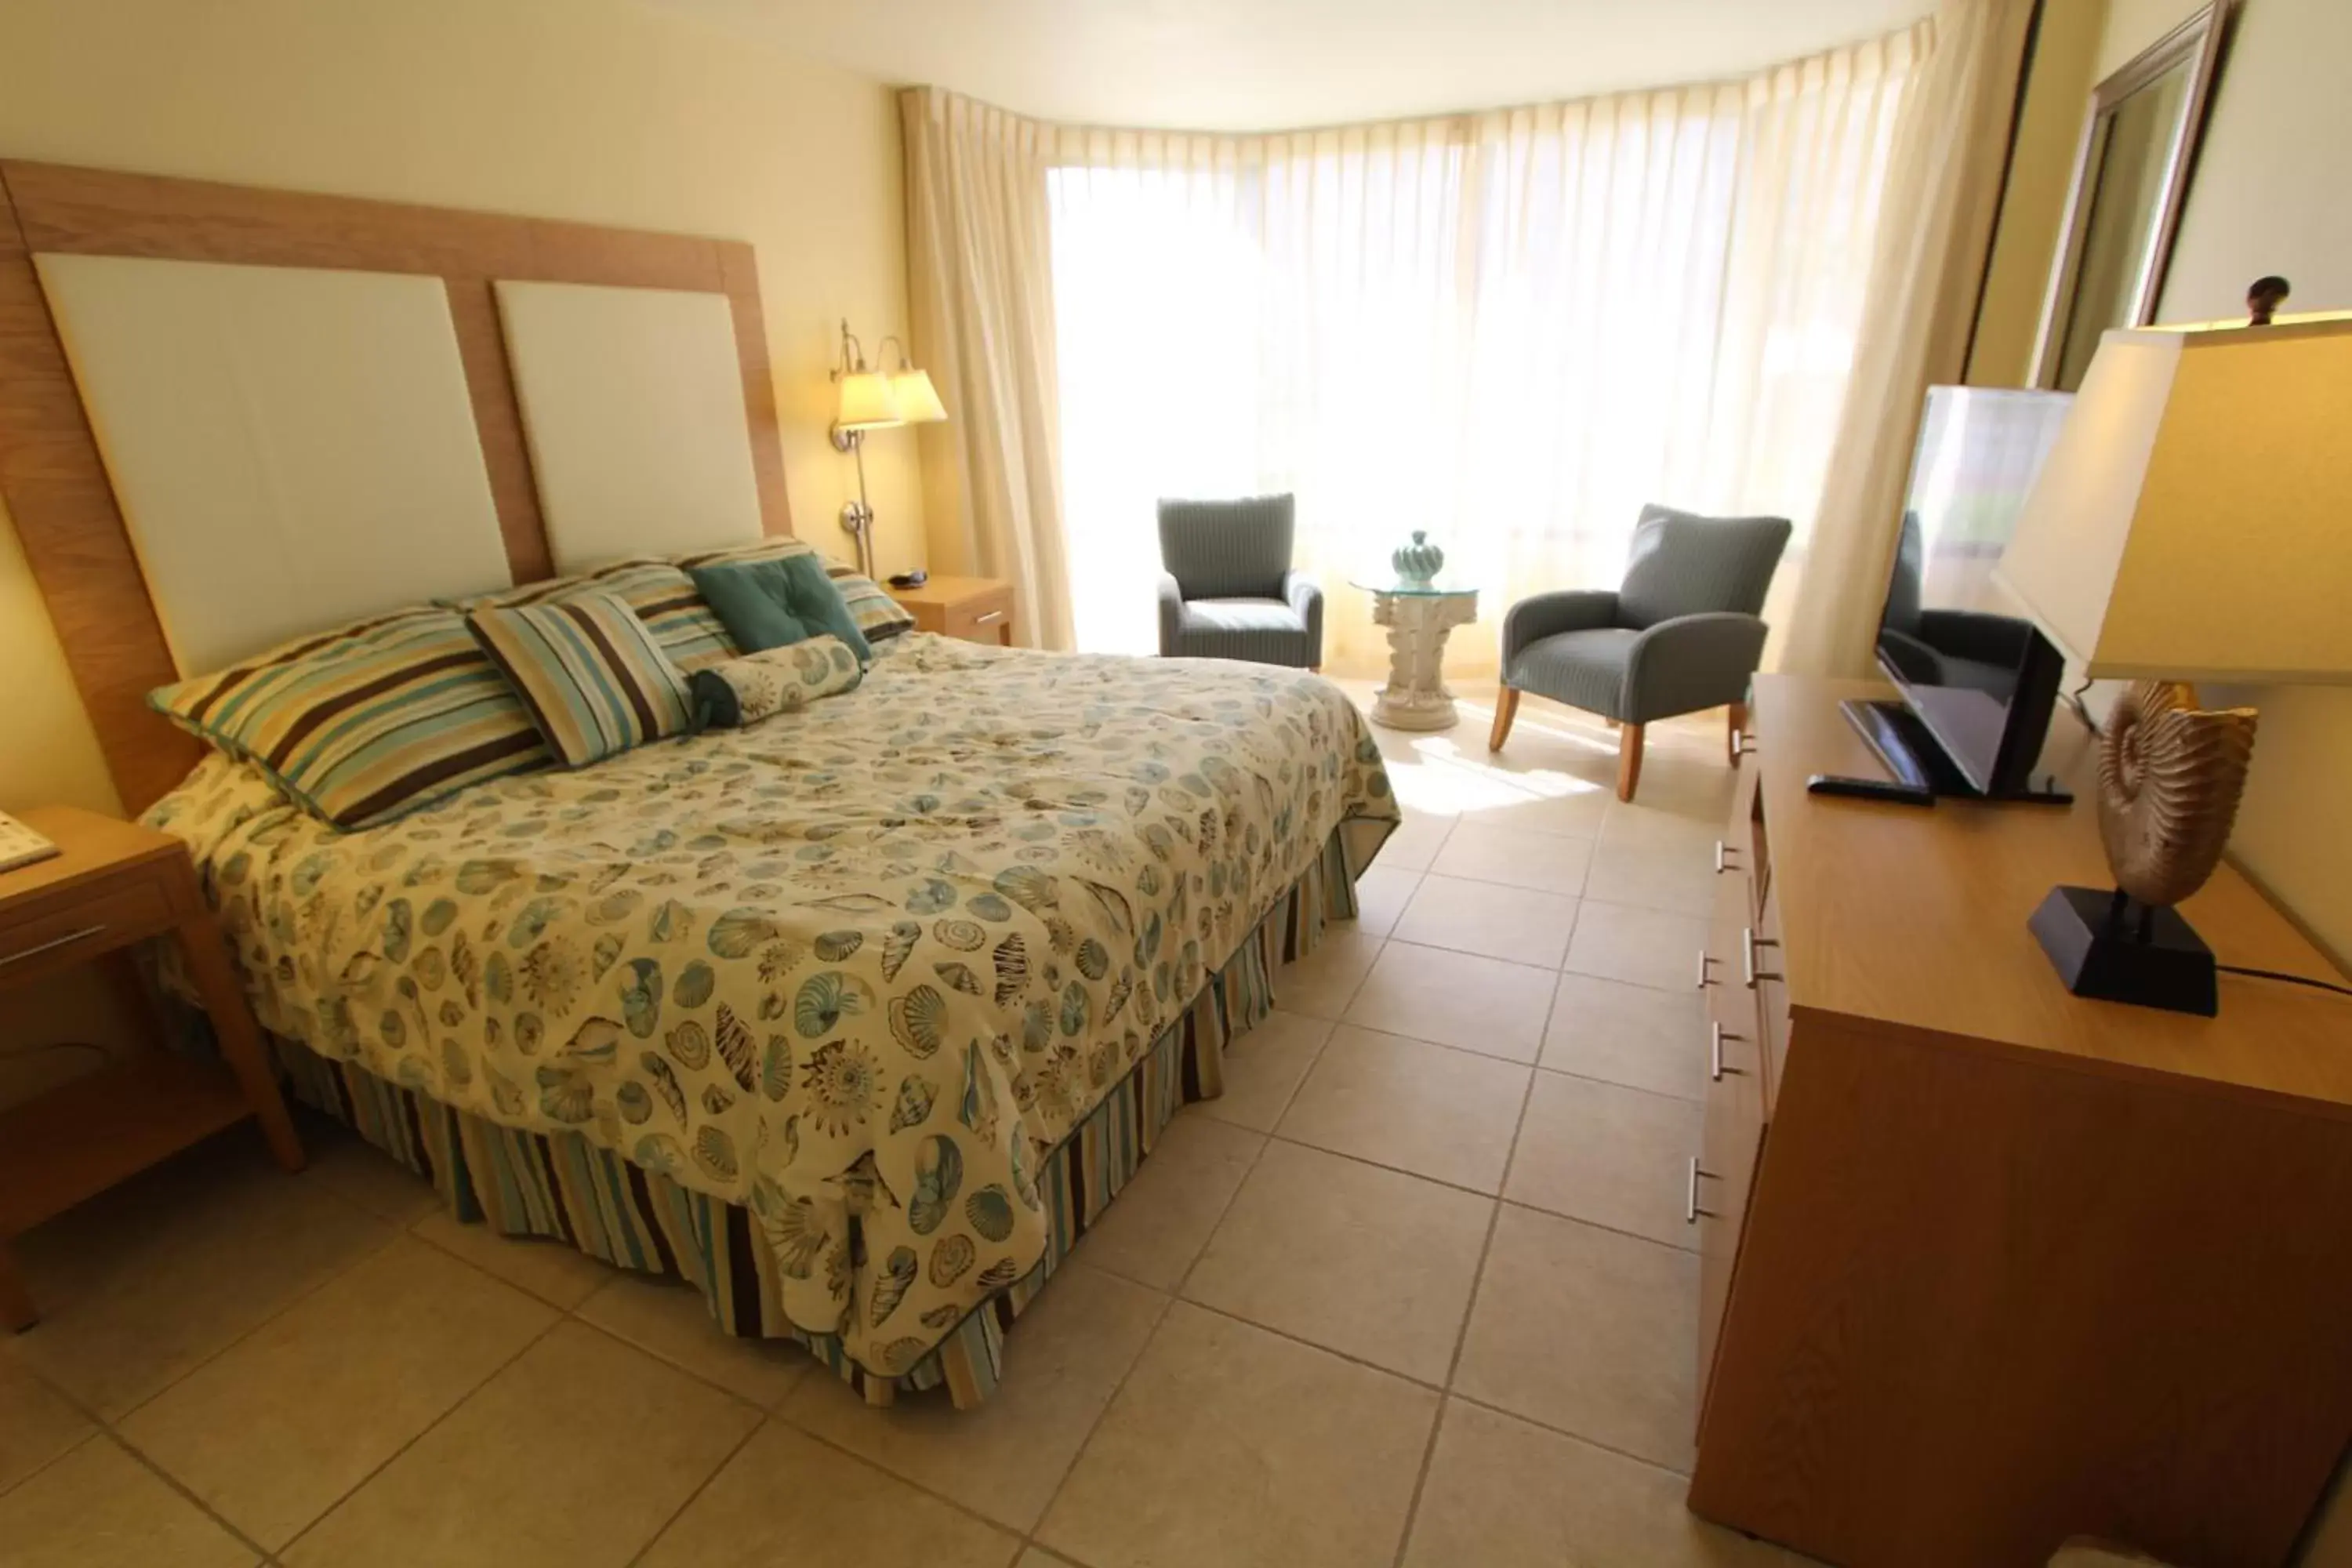 Bedroom, Room Photo in Royale Beach and Tennis Club, a VRI resort